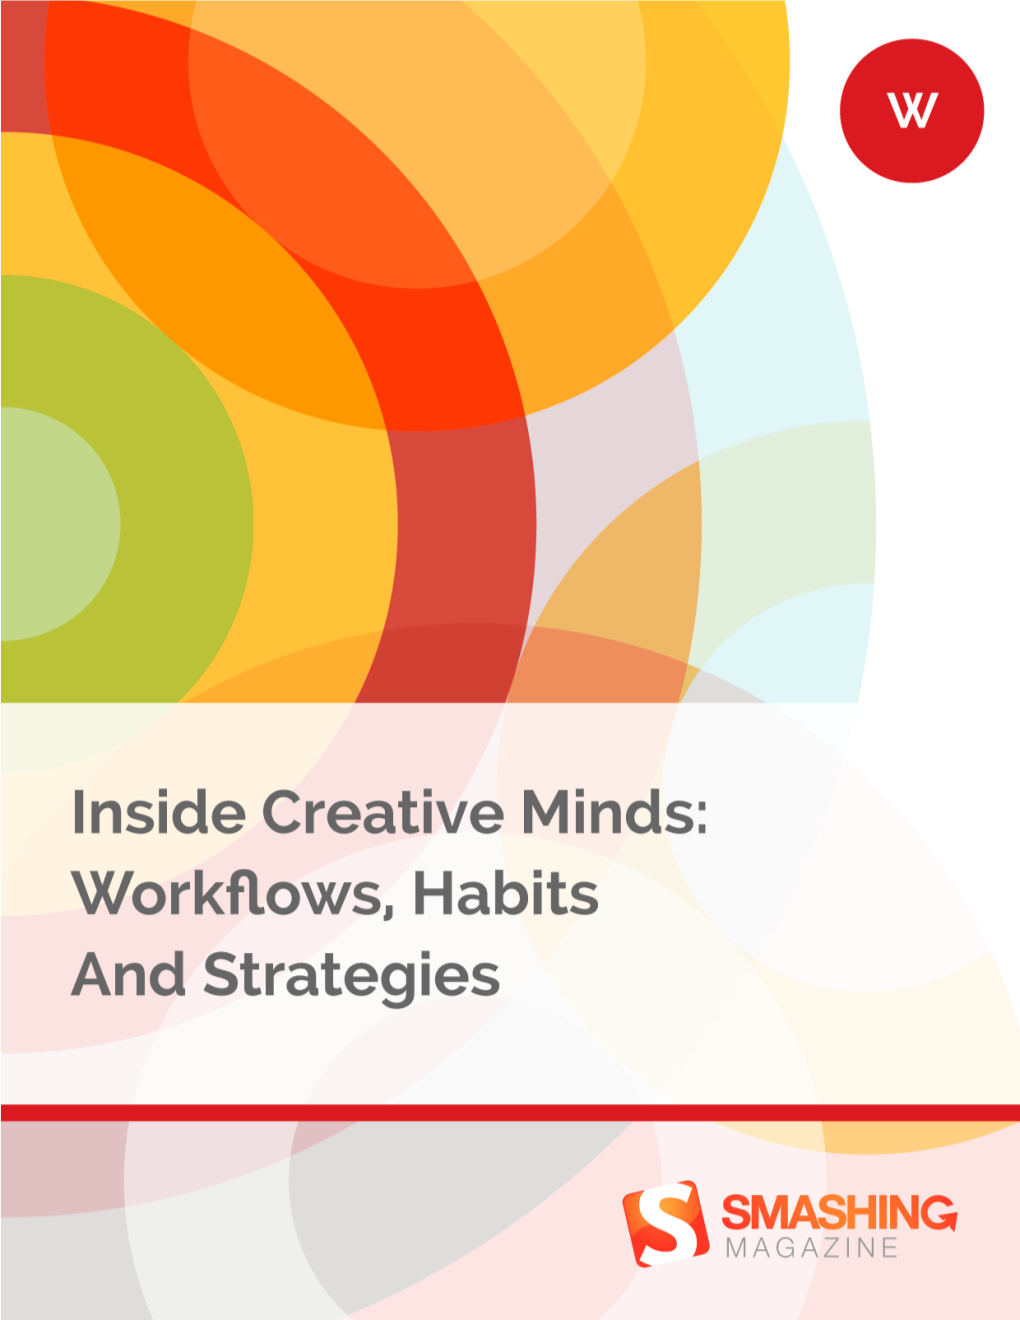 Inside Creative Minds: Workflows, Habits and Strategies